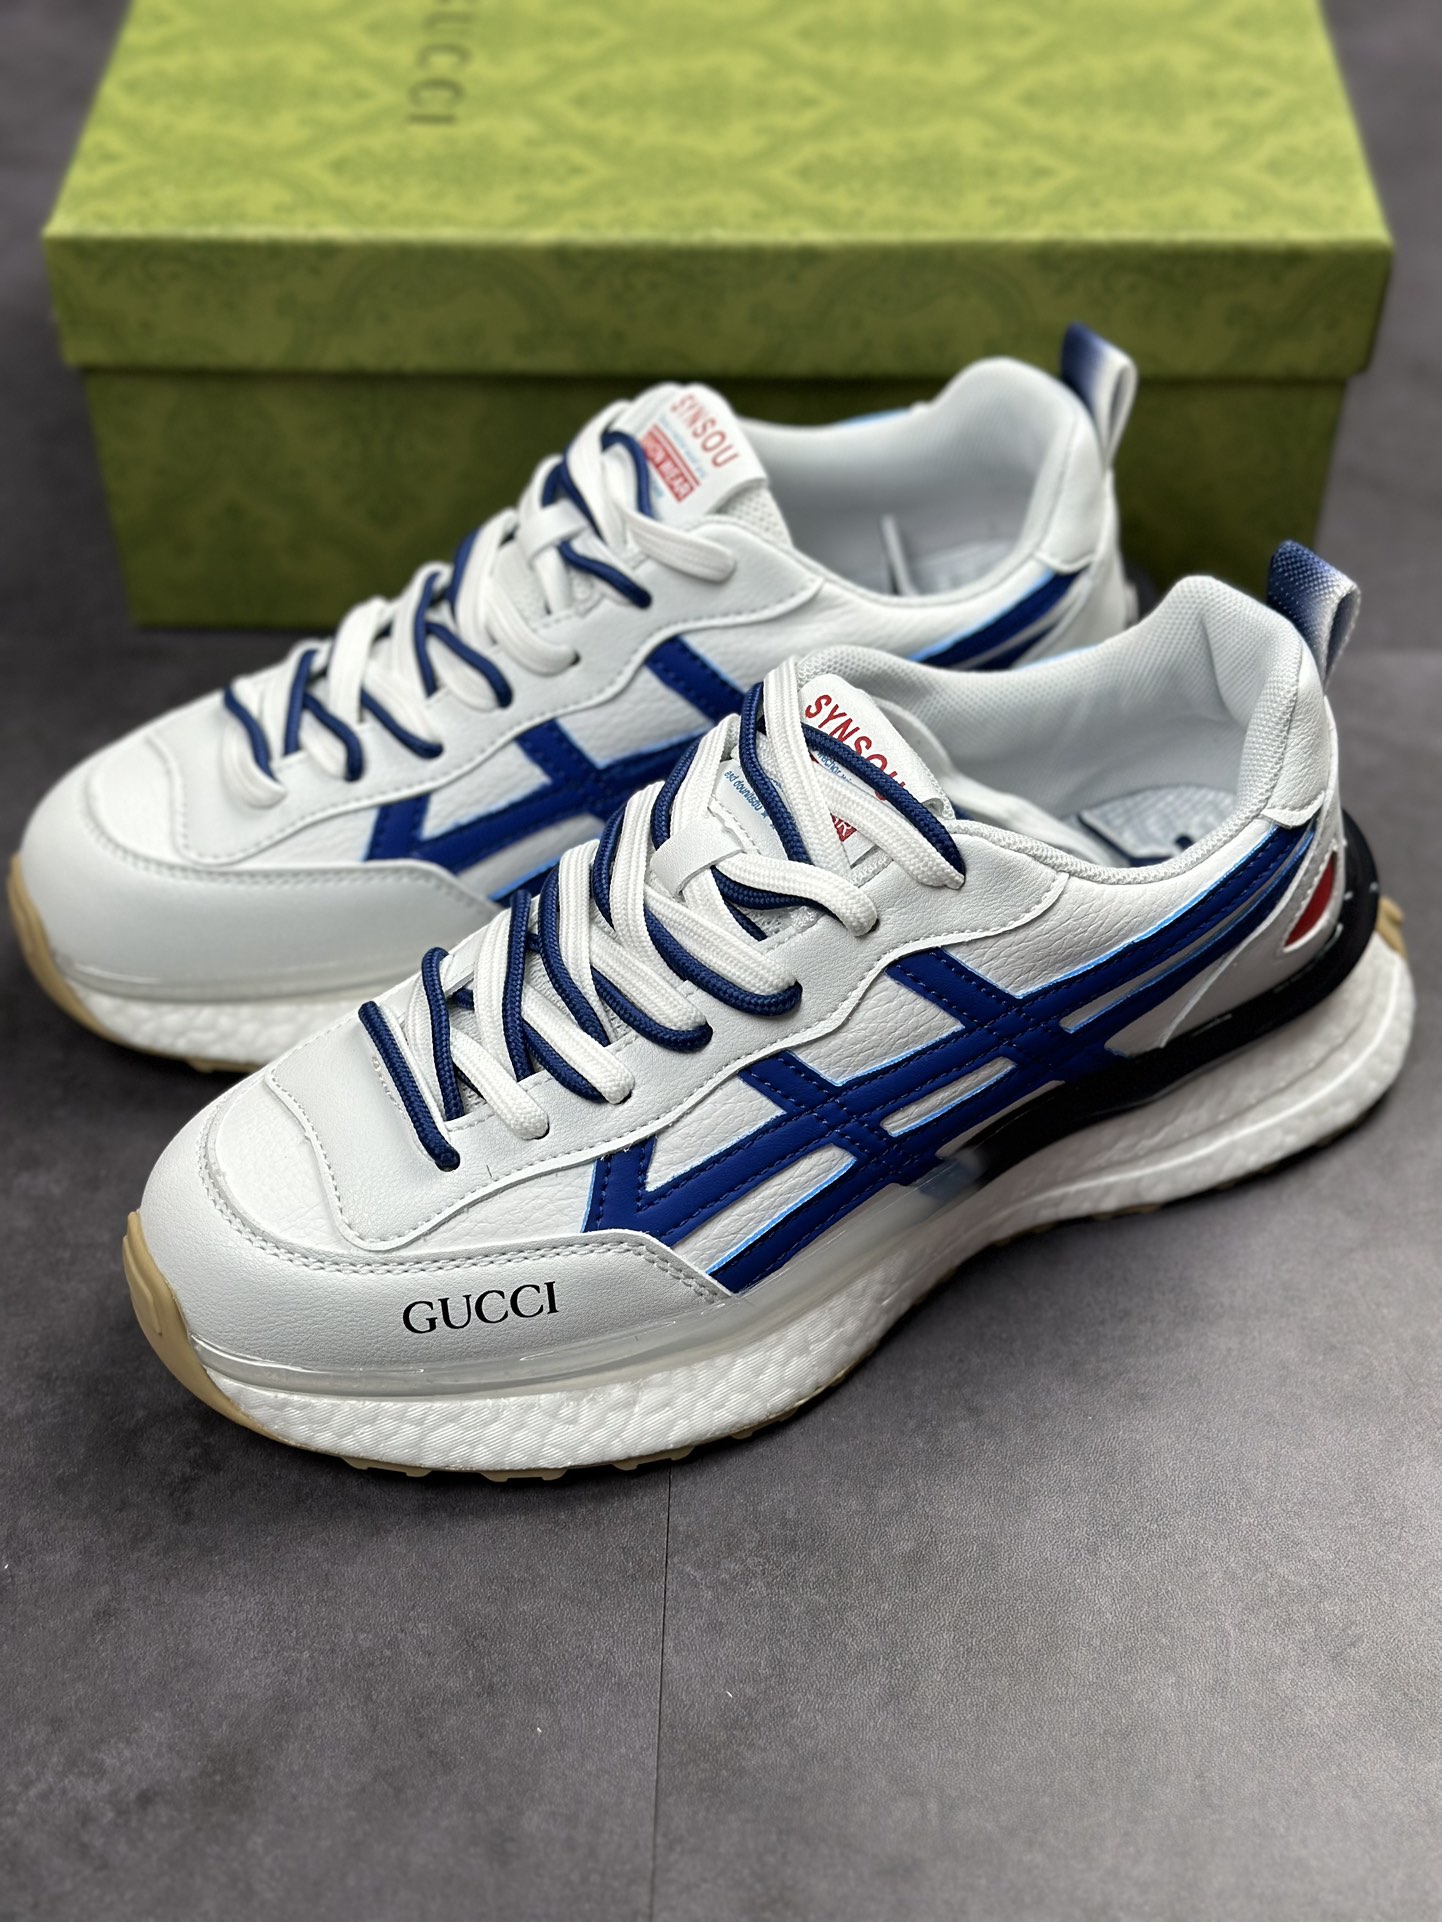 Gucci trend fashion casual sports shoes series